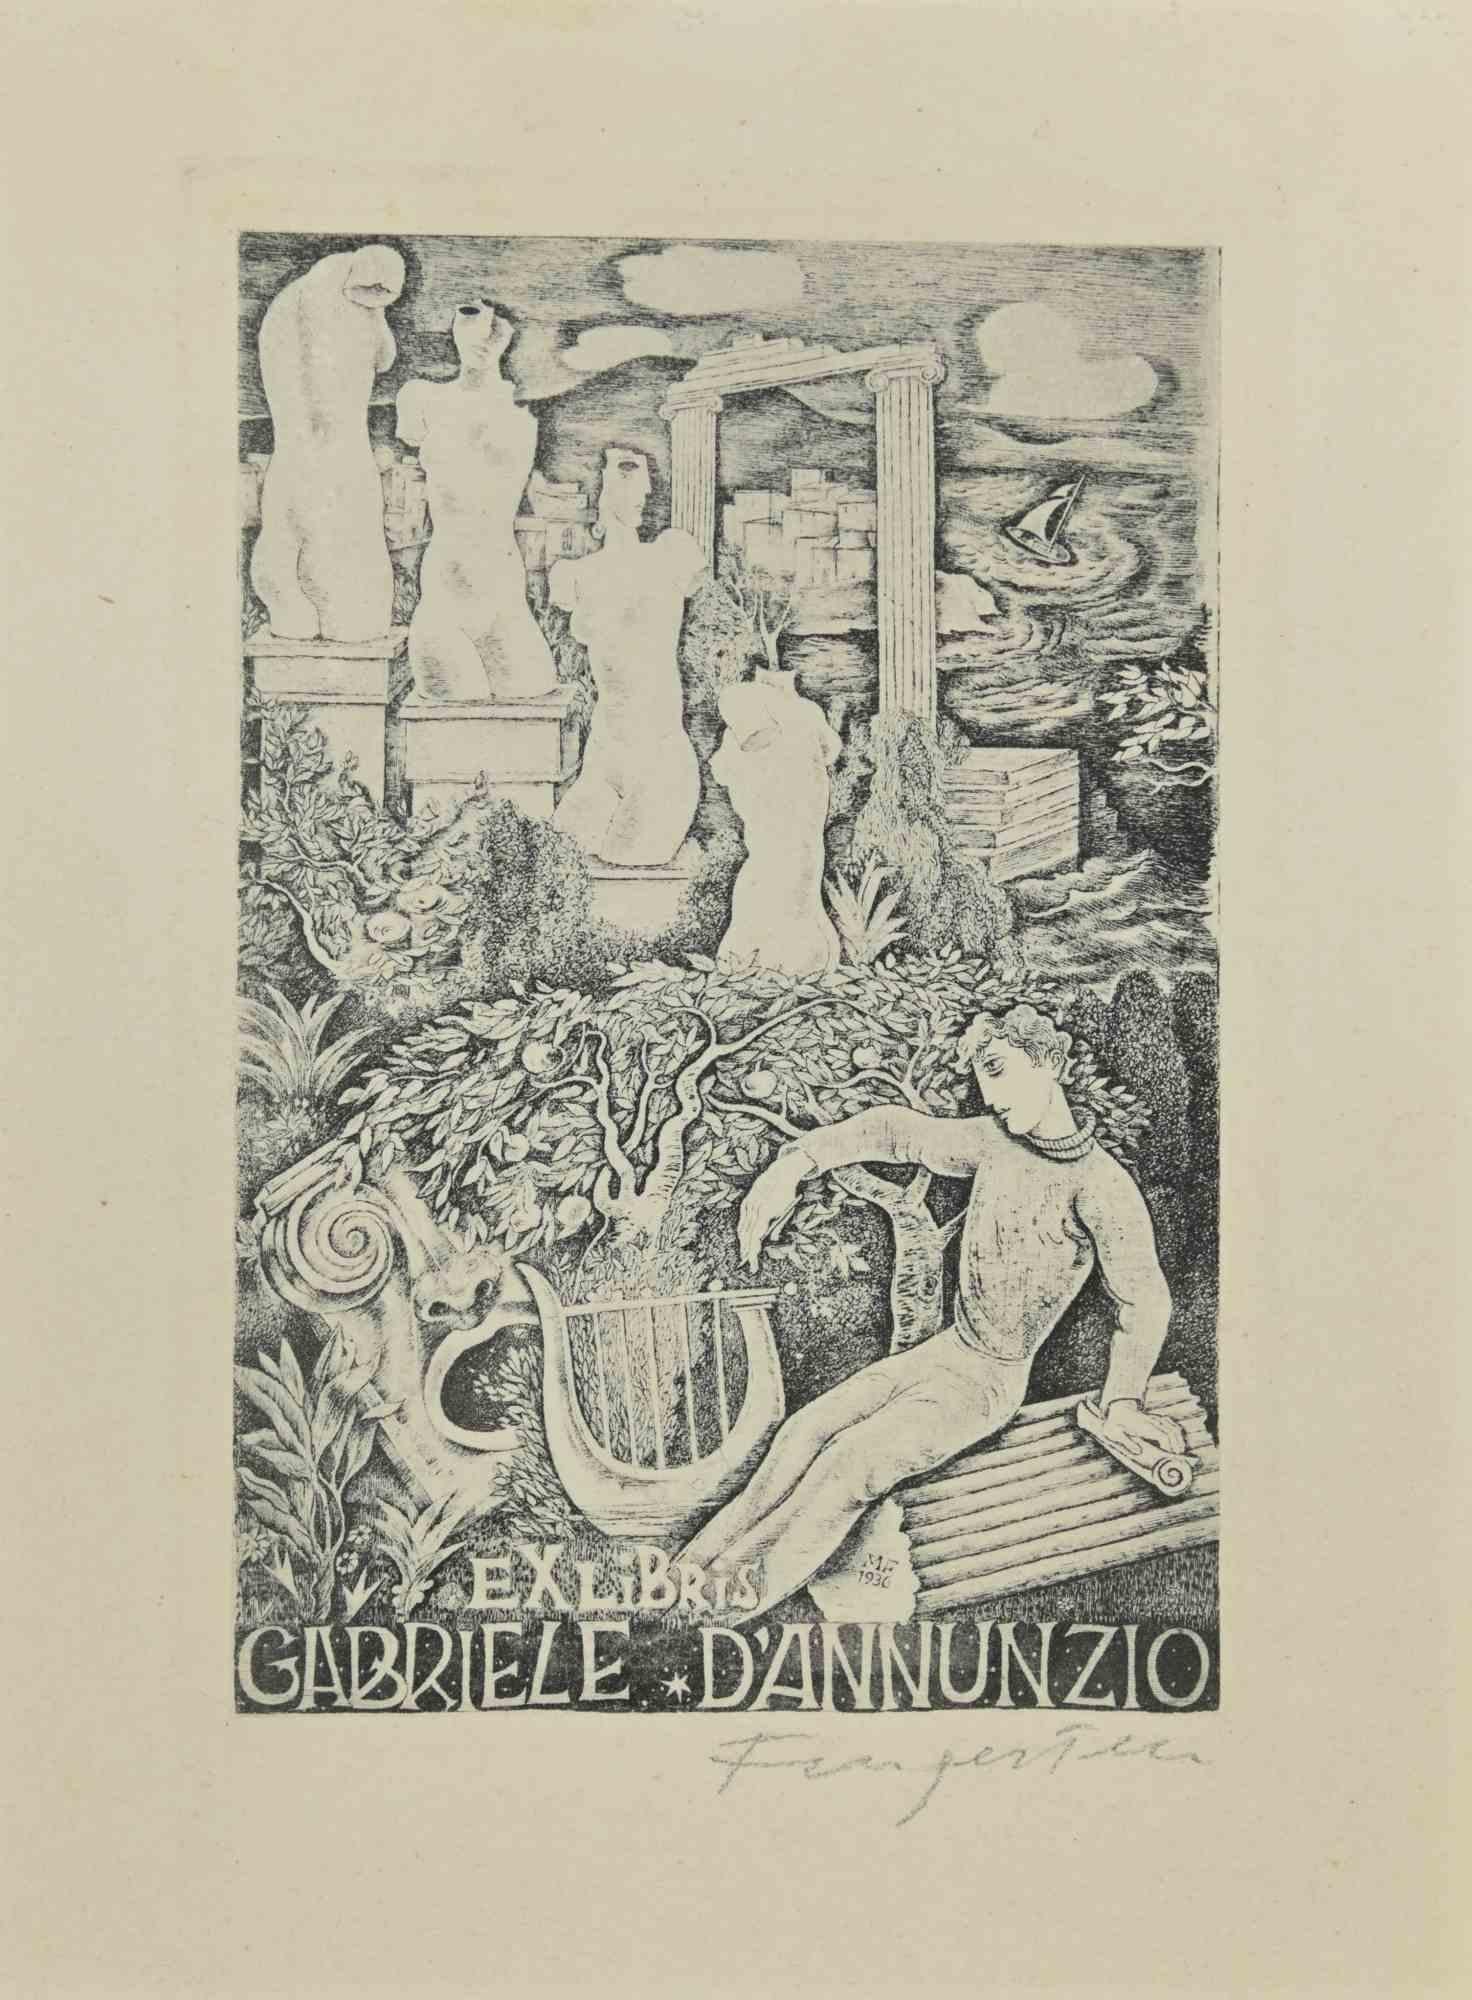 Ex Libris - Gabriele D'Annunzio is an Etching print created by  Michel Fingesten in 1936.

Hand signed on the lower margin.

Good conditions.

Michel Fingesten (1884 - 1943) was a Czech painter and engraver of Jewish origin. He is considered one of